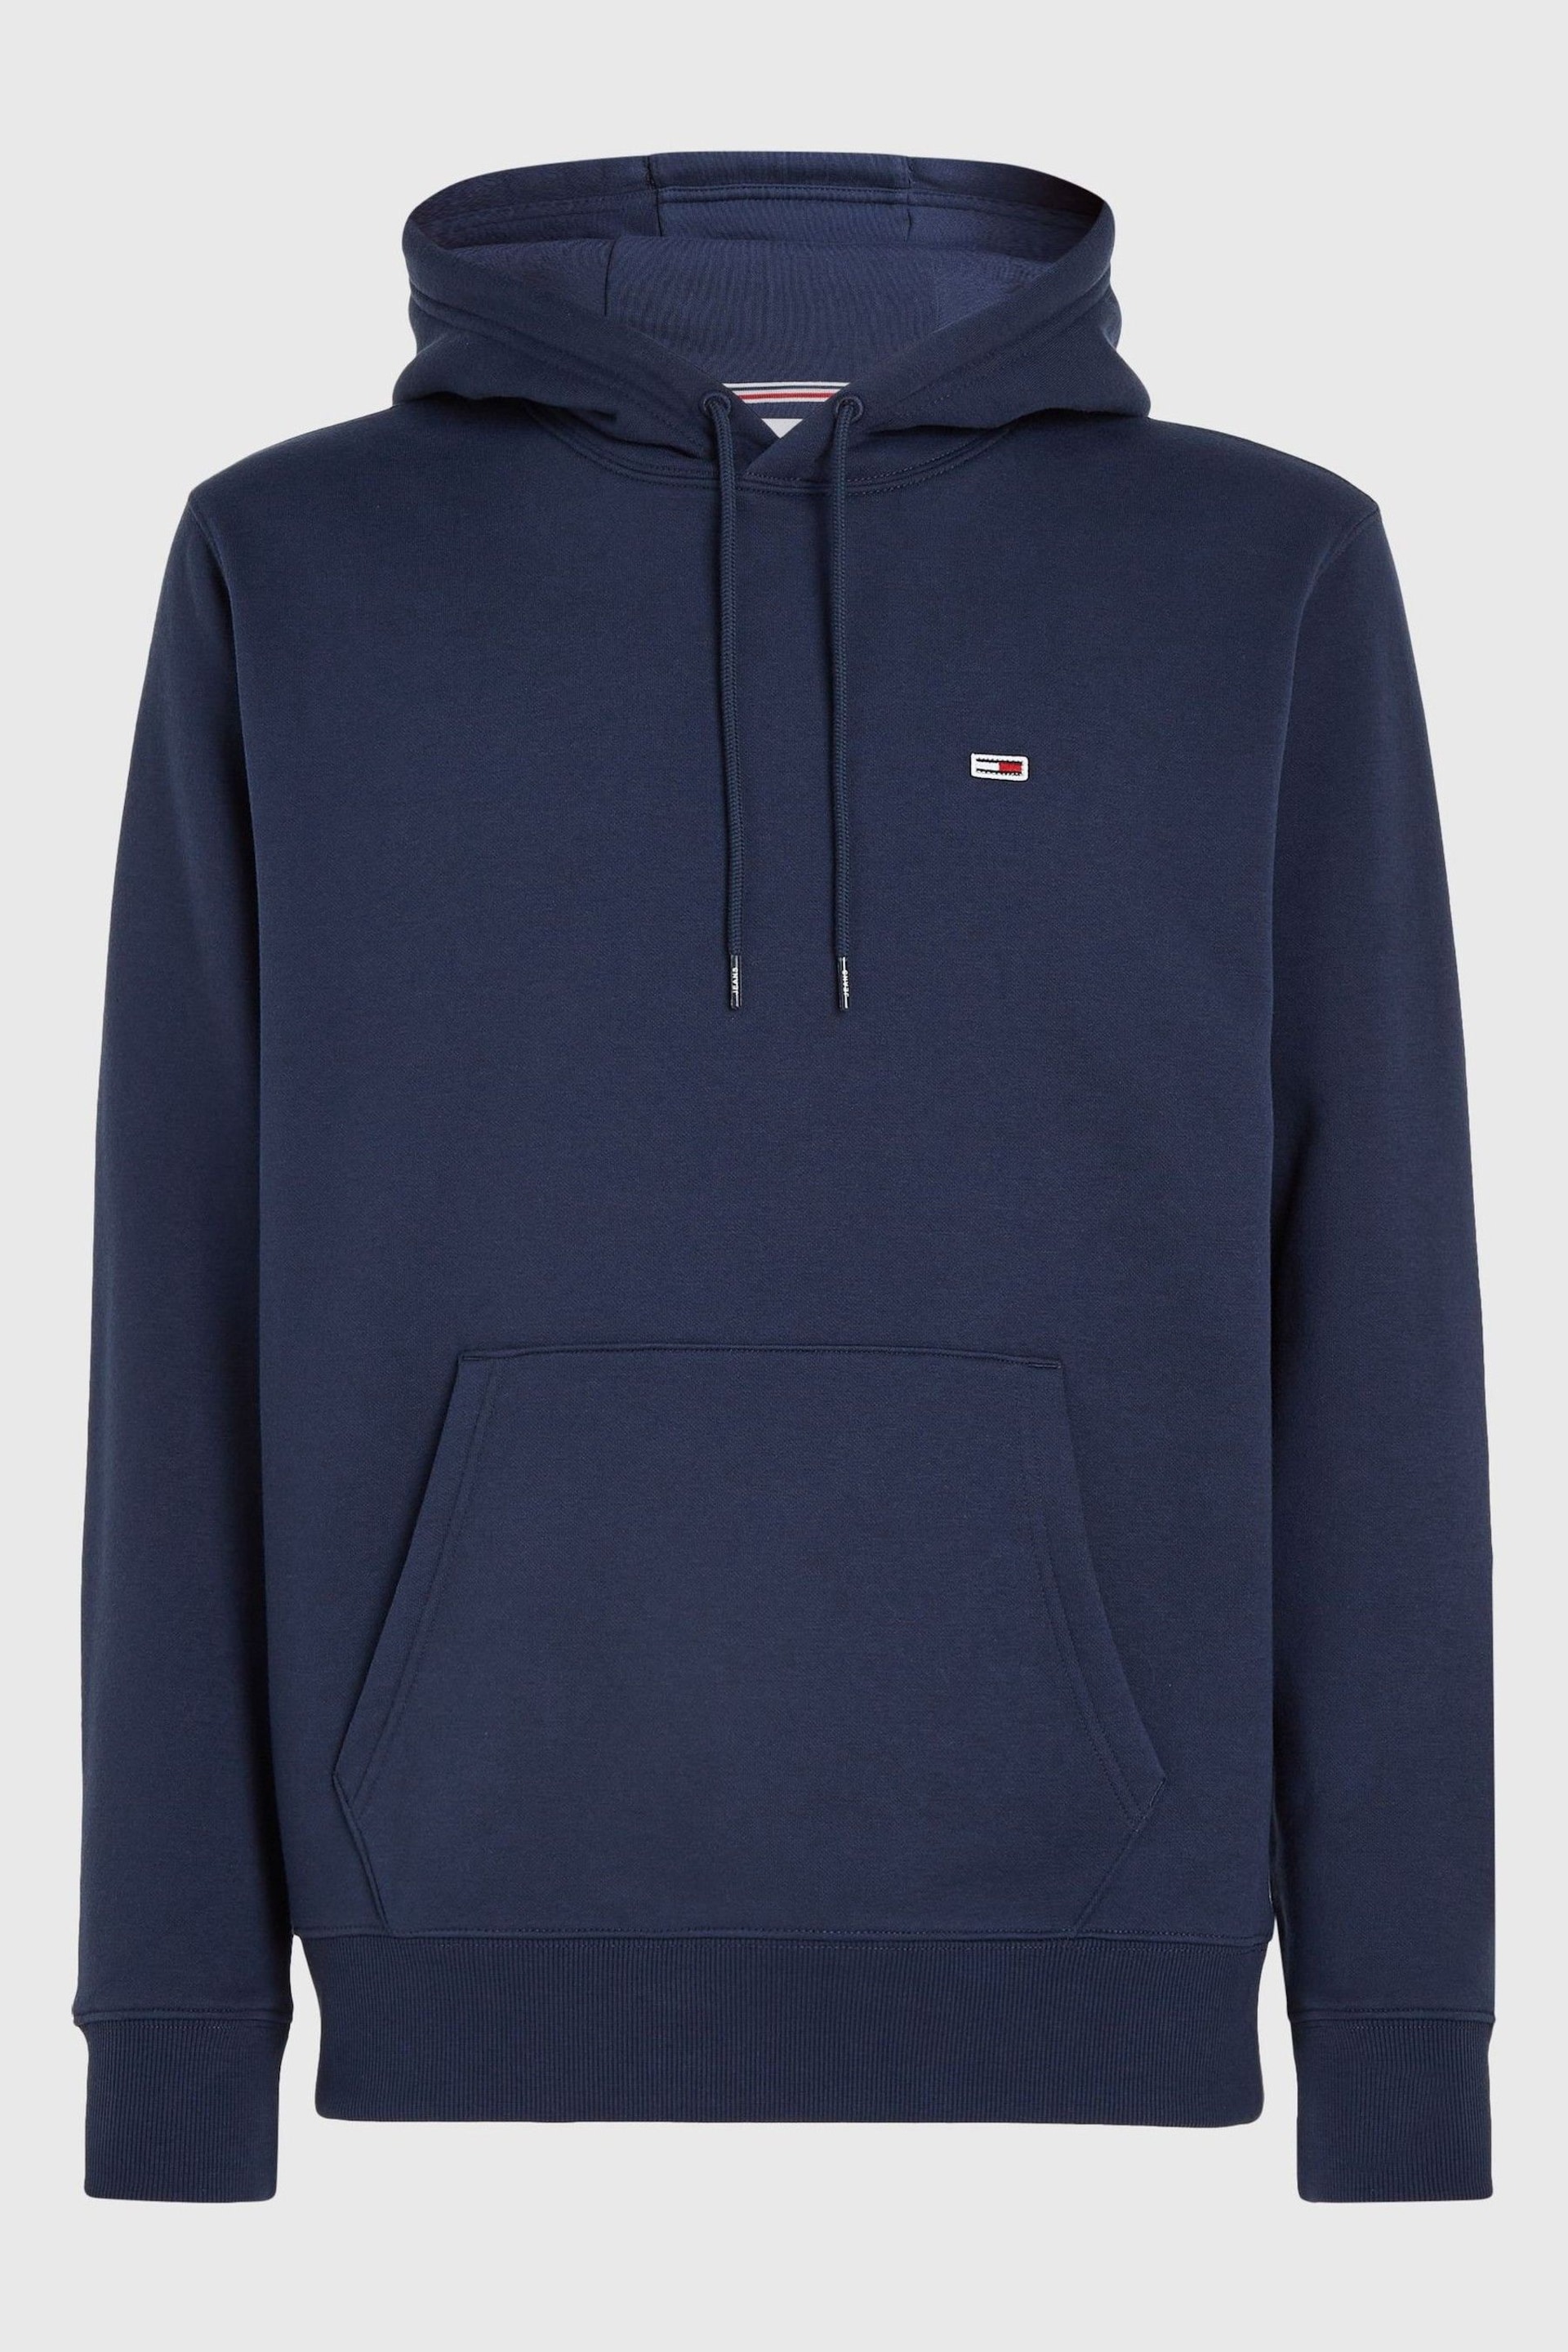 Tommy Jeans Blue Fleece Flag Patch Hoodie - Image 3 of 4